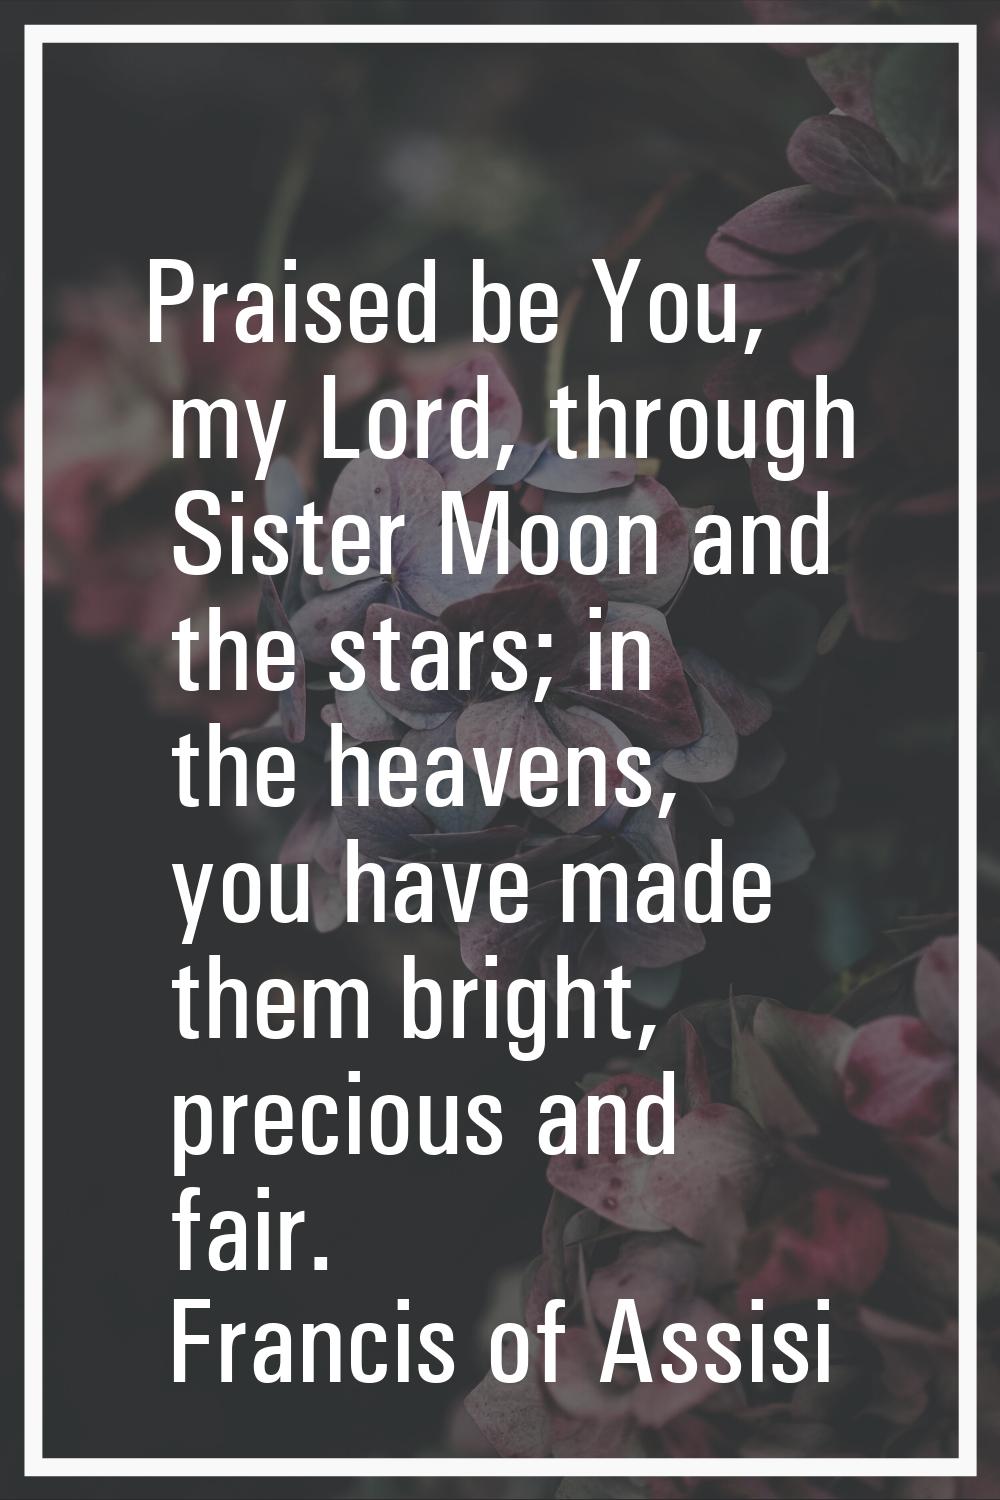 Praised be You, my Lord, through Sister Moon and the stars; in the heavens, you have made them brig